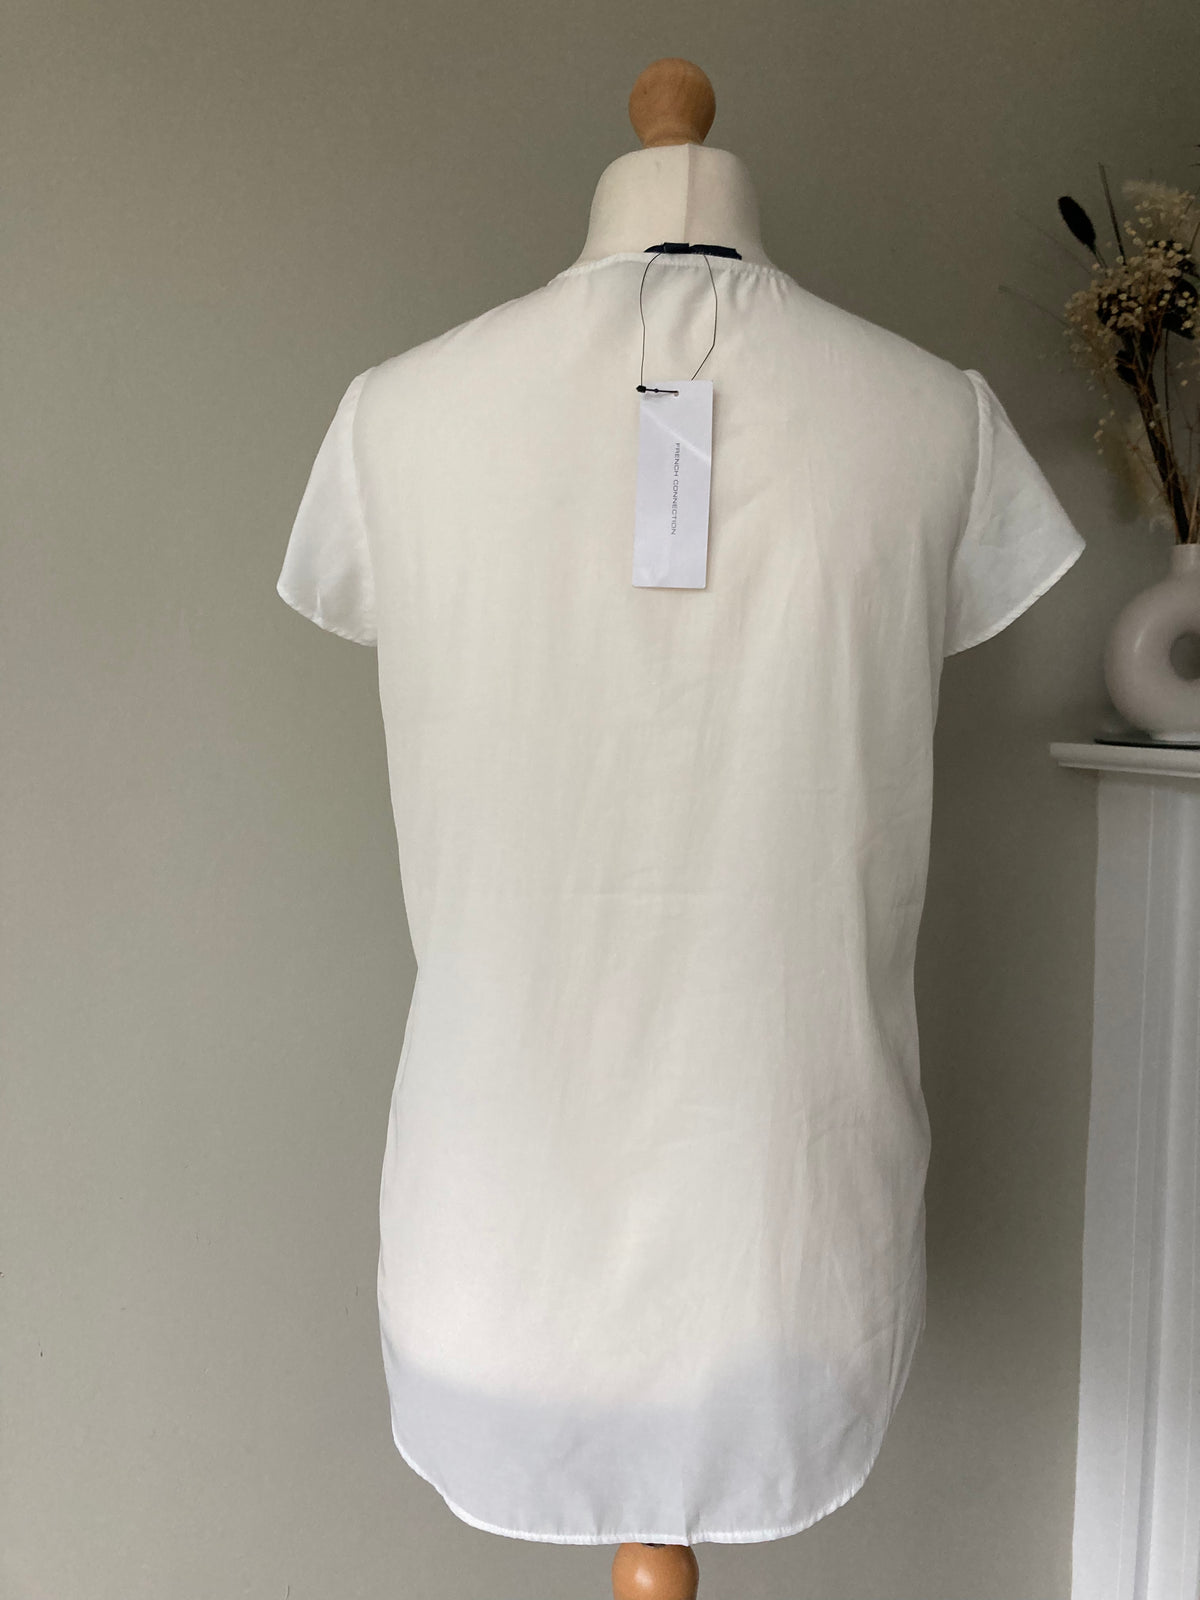 Ery Crepe Short Sleeve Shirt by FRENCH CONNECTION - Size M